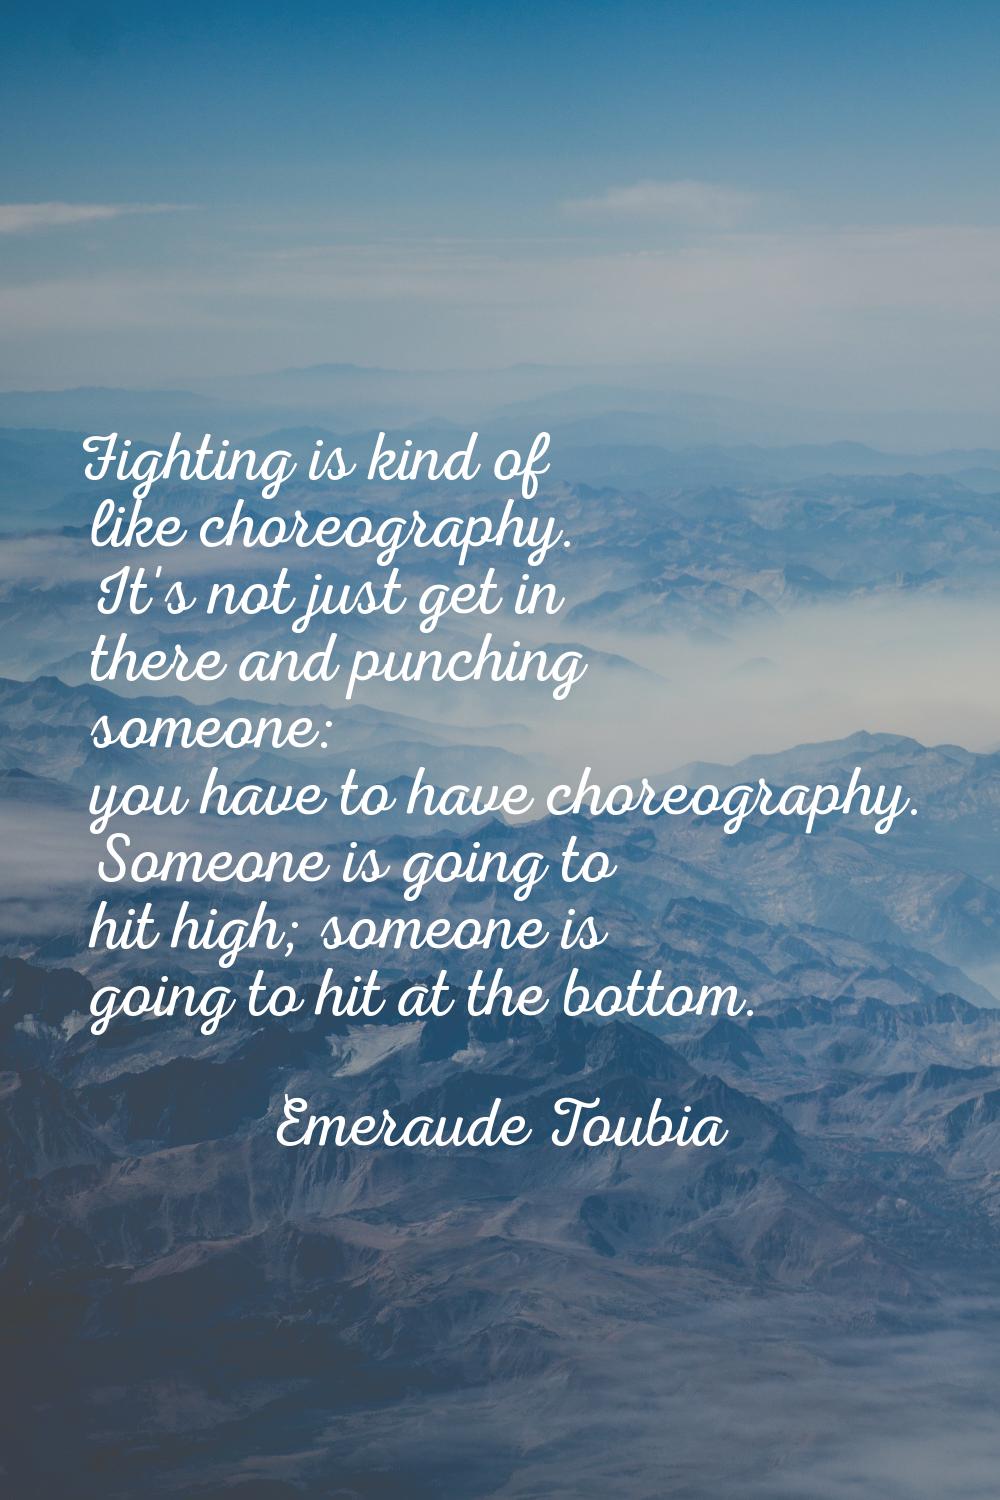 Fighting is kind of like choreography. It's not just get in there and punching someone: you have to